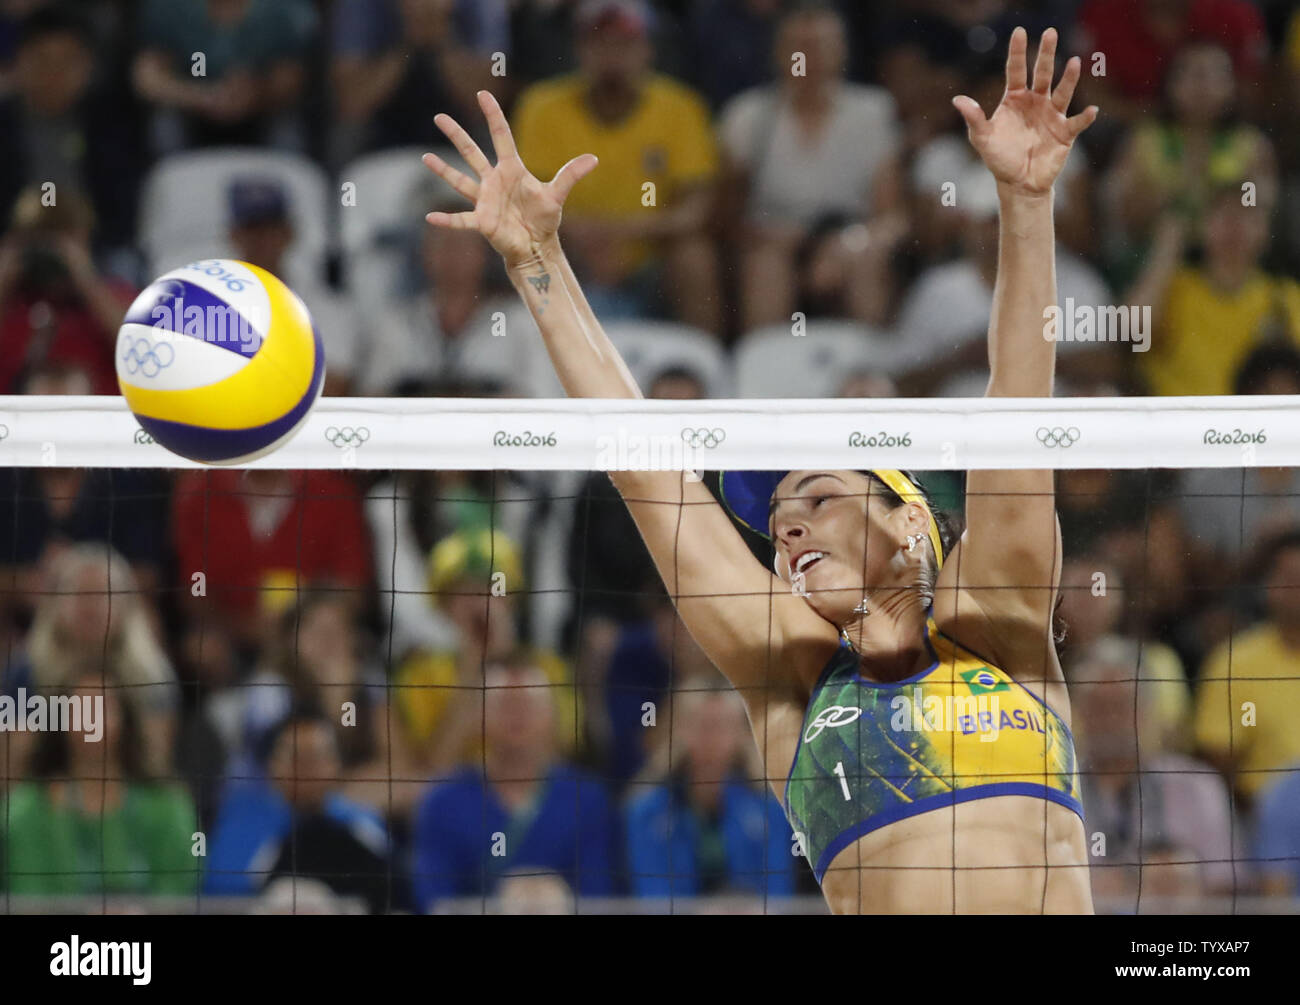 Silver medalists Agatha Bednarczuk Rippel of Brazil competes in their match against Germany in the Women's Beach Volleybal at the Beach Volleyball Arena at the 2016 Rio Summer Olympics in Rio de Janeiro, Brazil, on August 17, 2016.      Photo by Matthew Healey/UPI Stock Photo